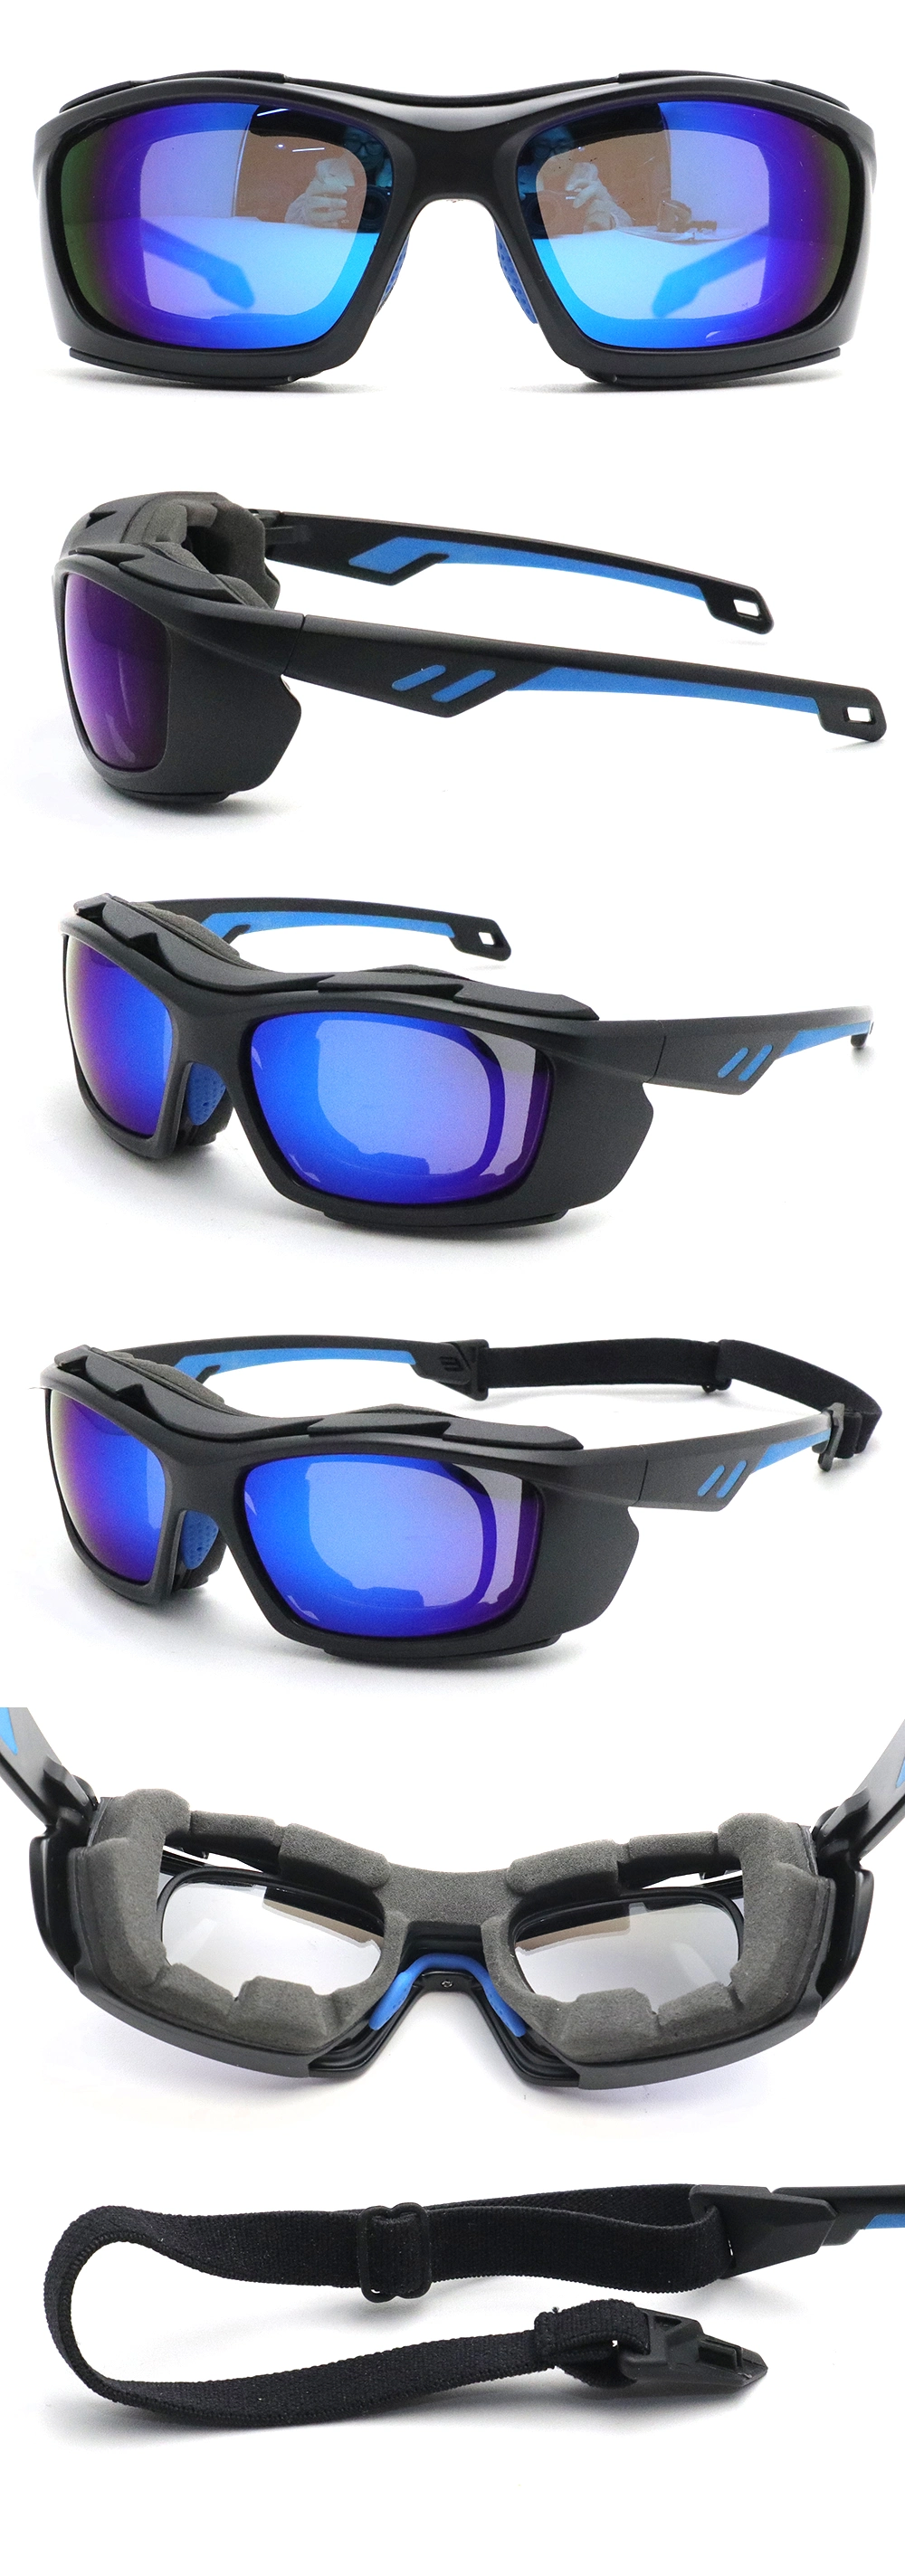 New Cycling Wind Proof Sunglasses for Men and Women Fashionable UV Proof Mountaineering Ski Sunglasses